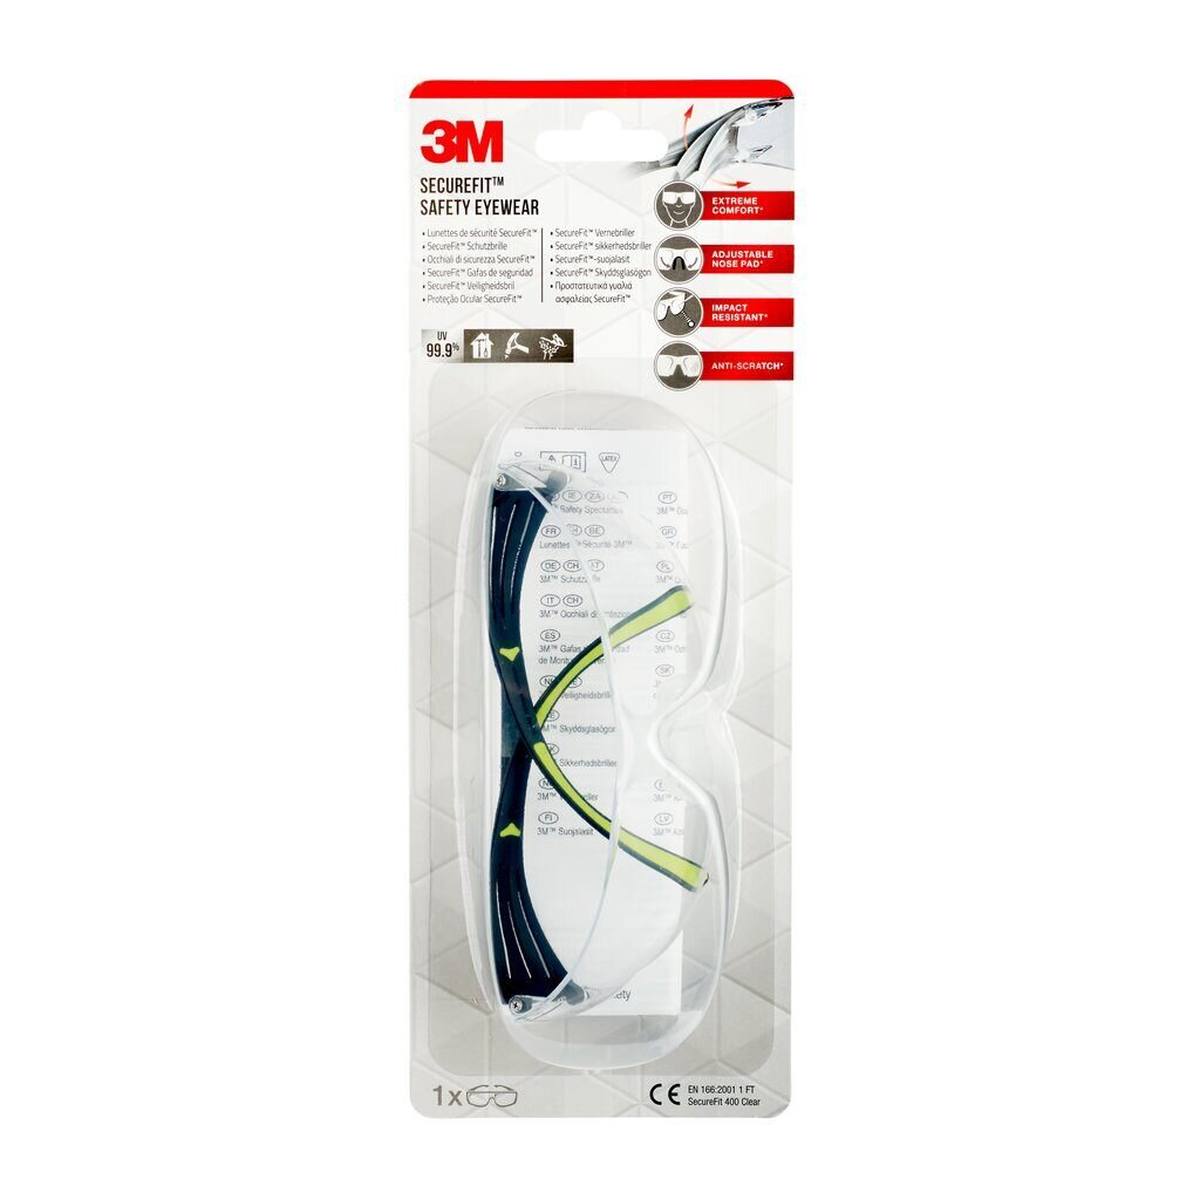 3M SecureFit 400 safety spectacles, clear, SF400C